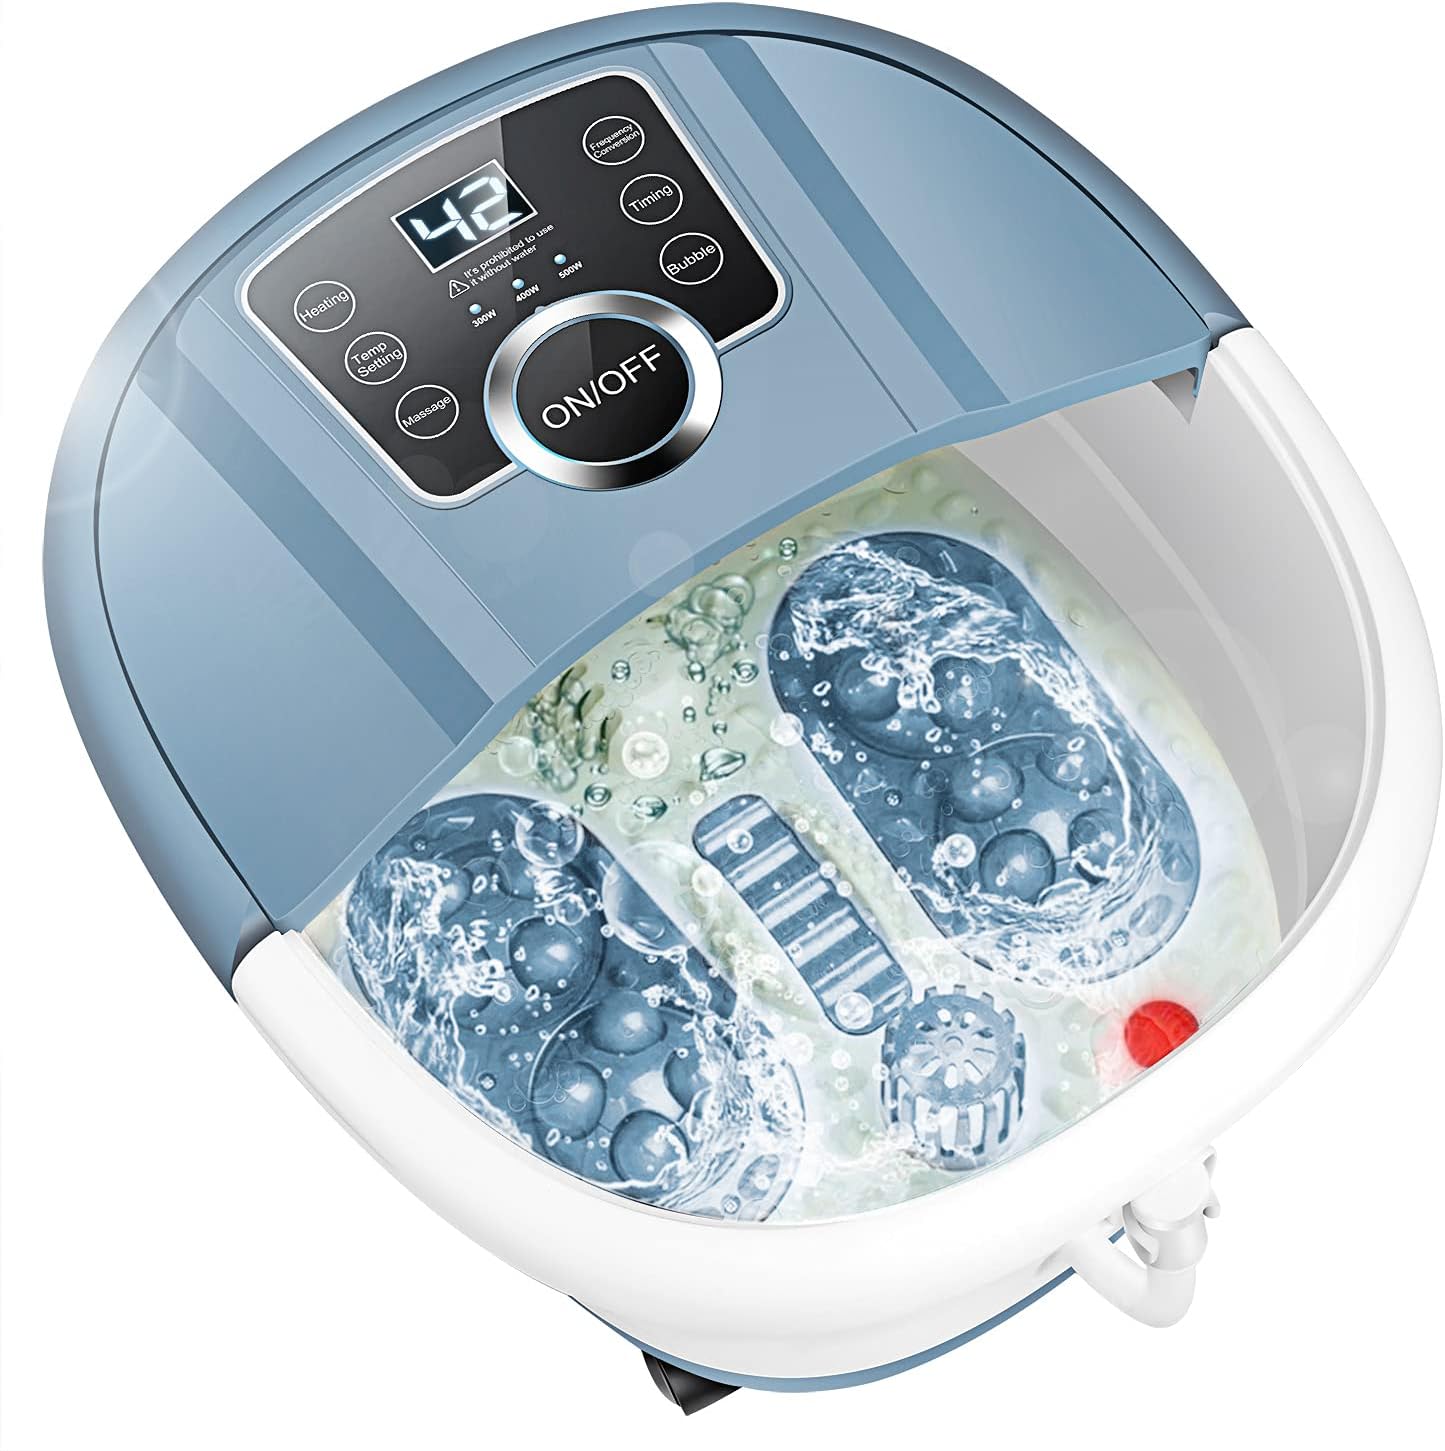 Ovitus Foot Bath Spa Massager w/Heat,16 Motorized Shiatsu Roller,Frequency Conversion,Adjustable Time&Temperature,LED Display Touch-Key